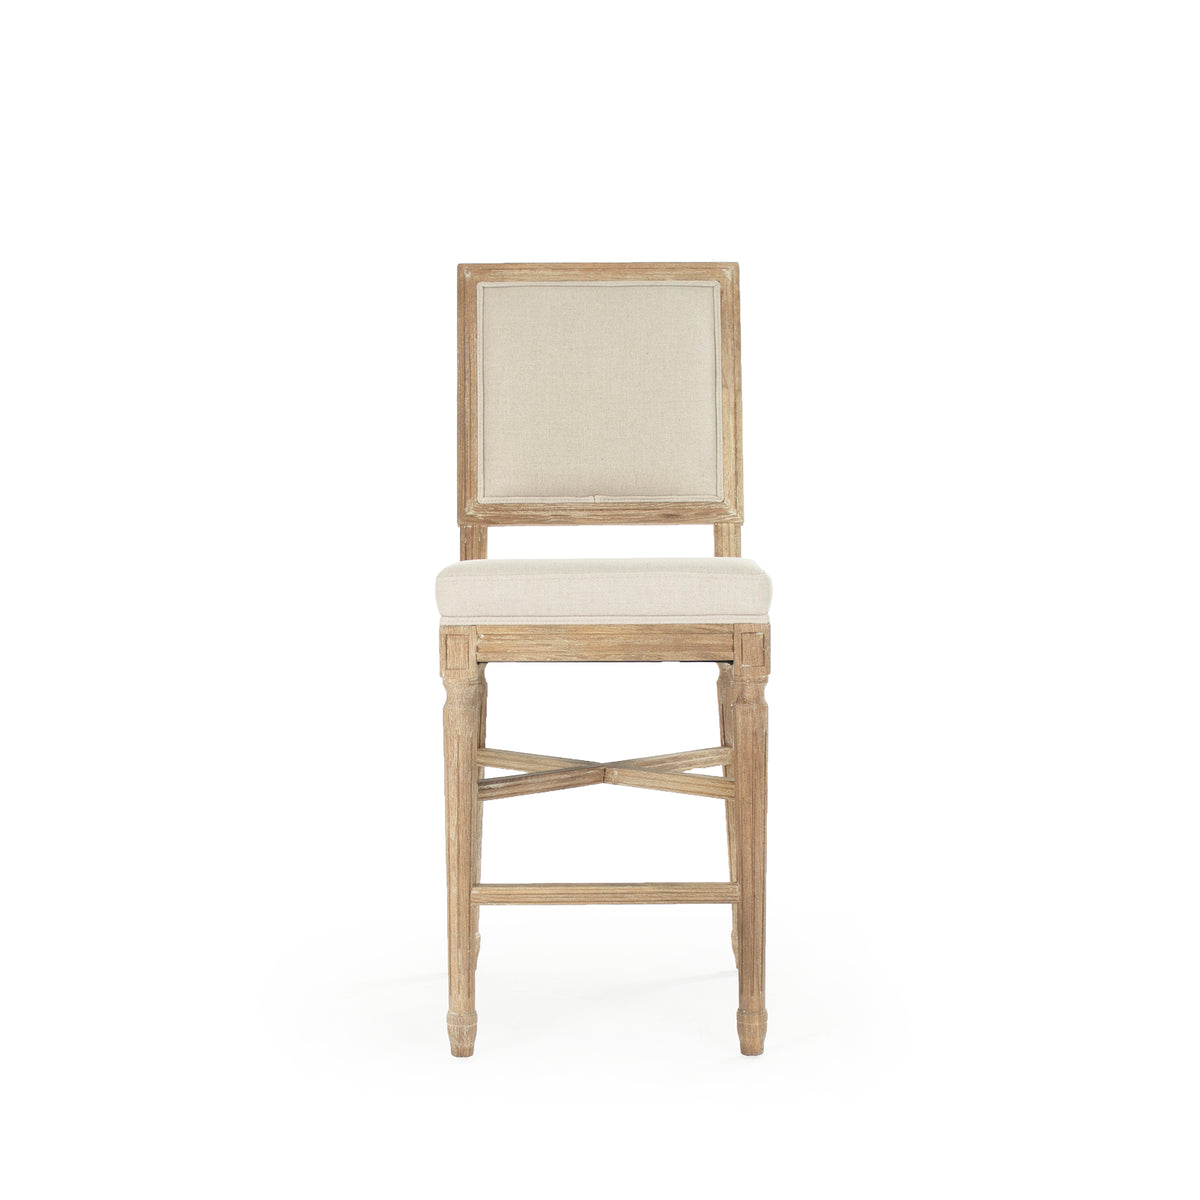 Louis Counter Stool by Zentique